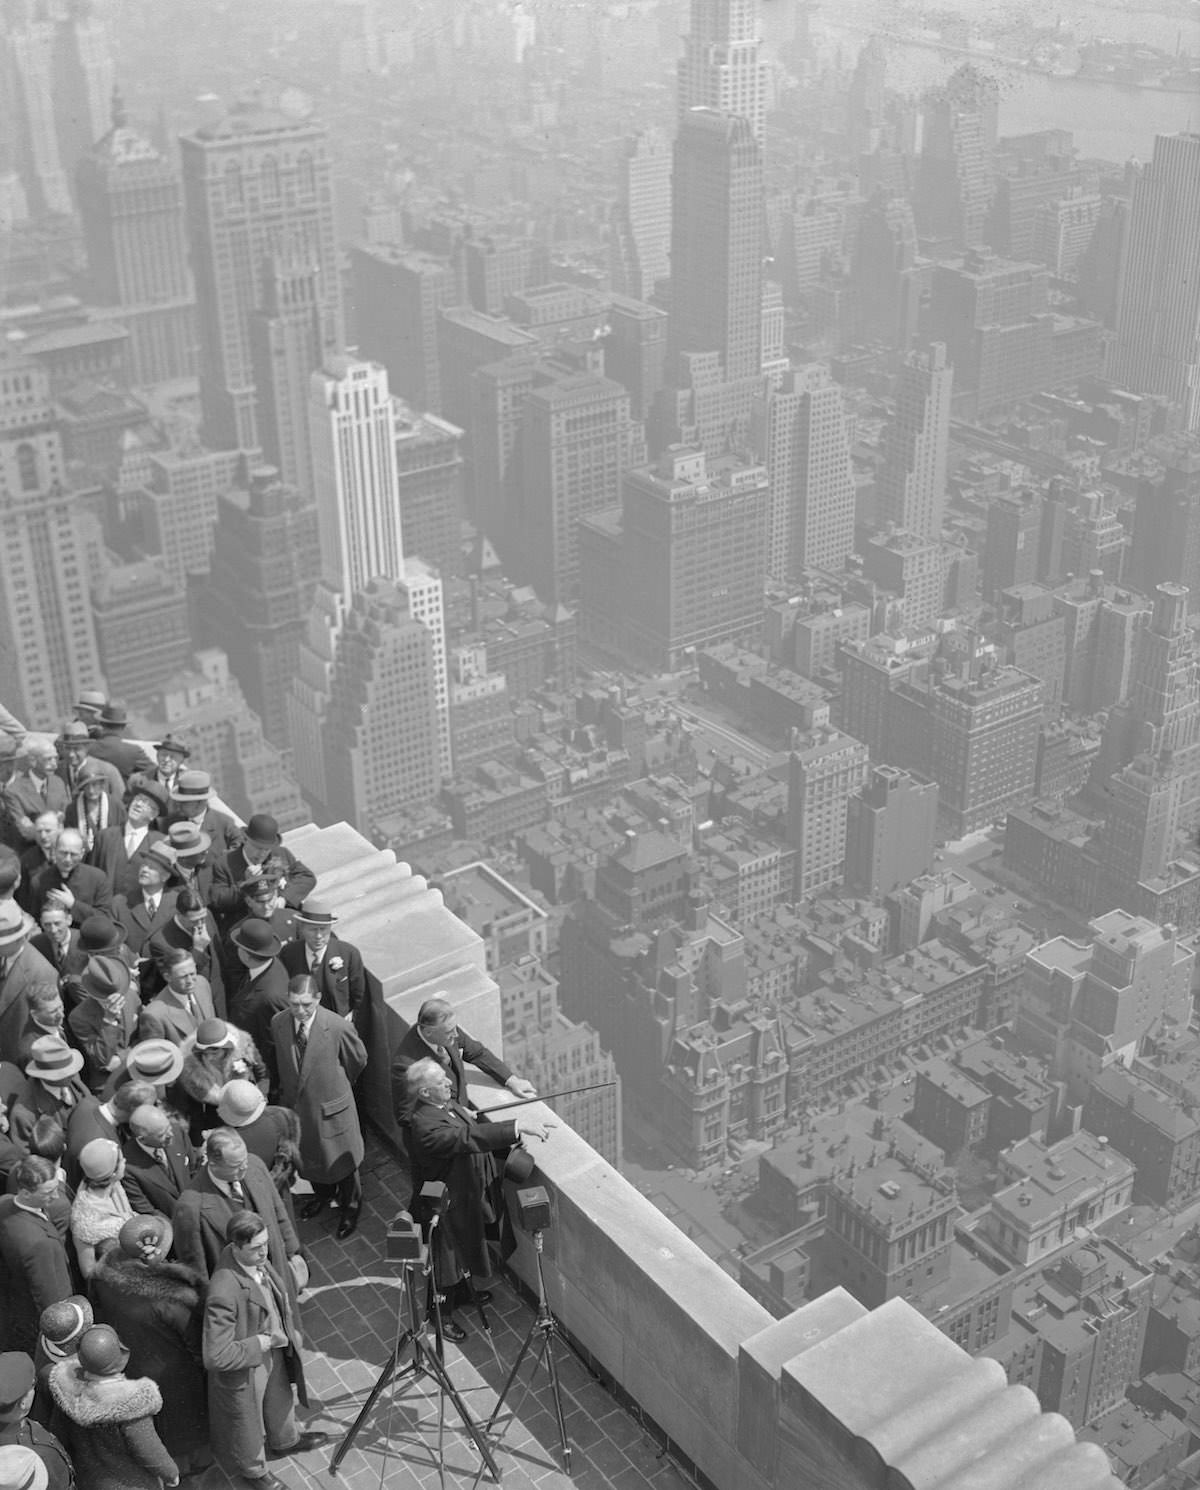 Ex-Governor Alfred E. Smith, Governor Franklin D. Roosevelt, and others at the top of the Empire State Building, tallest in the world, gazing out over the New York panorama.